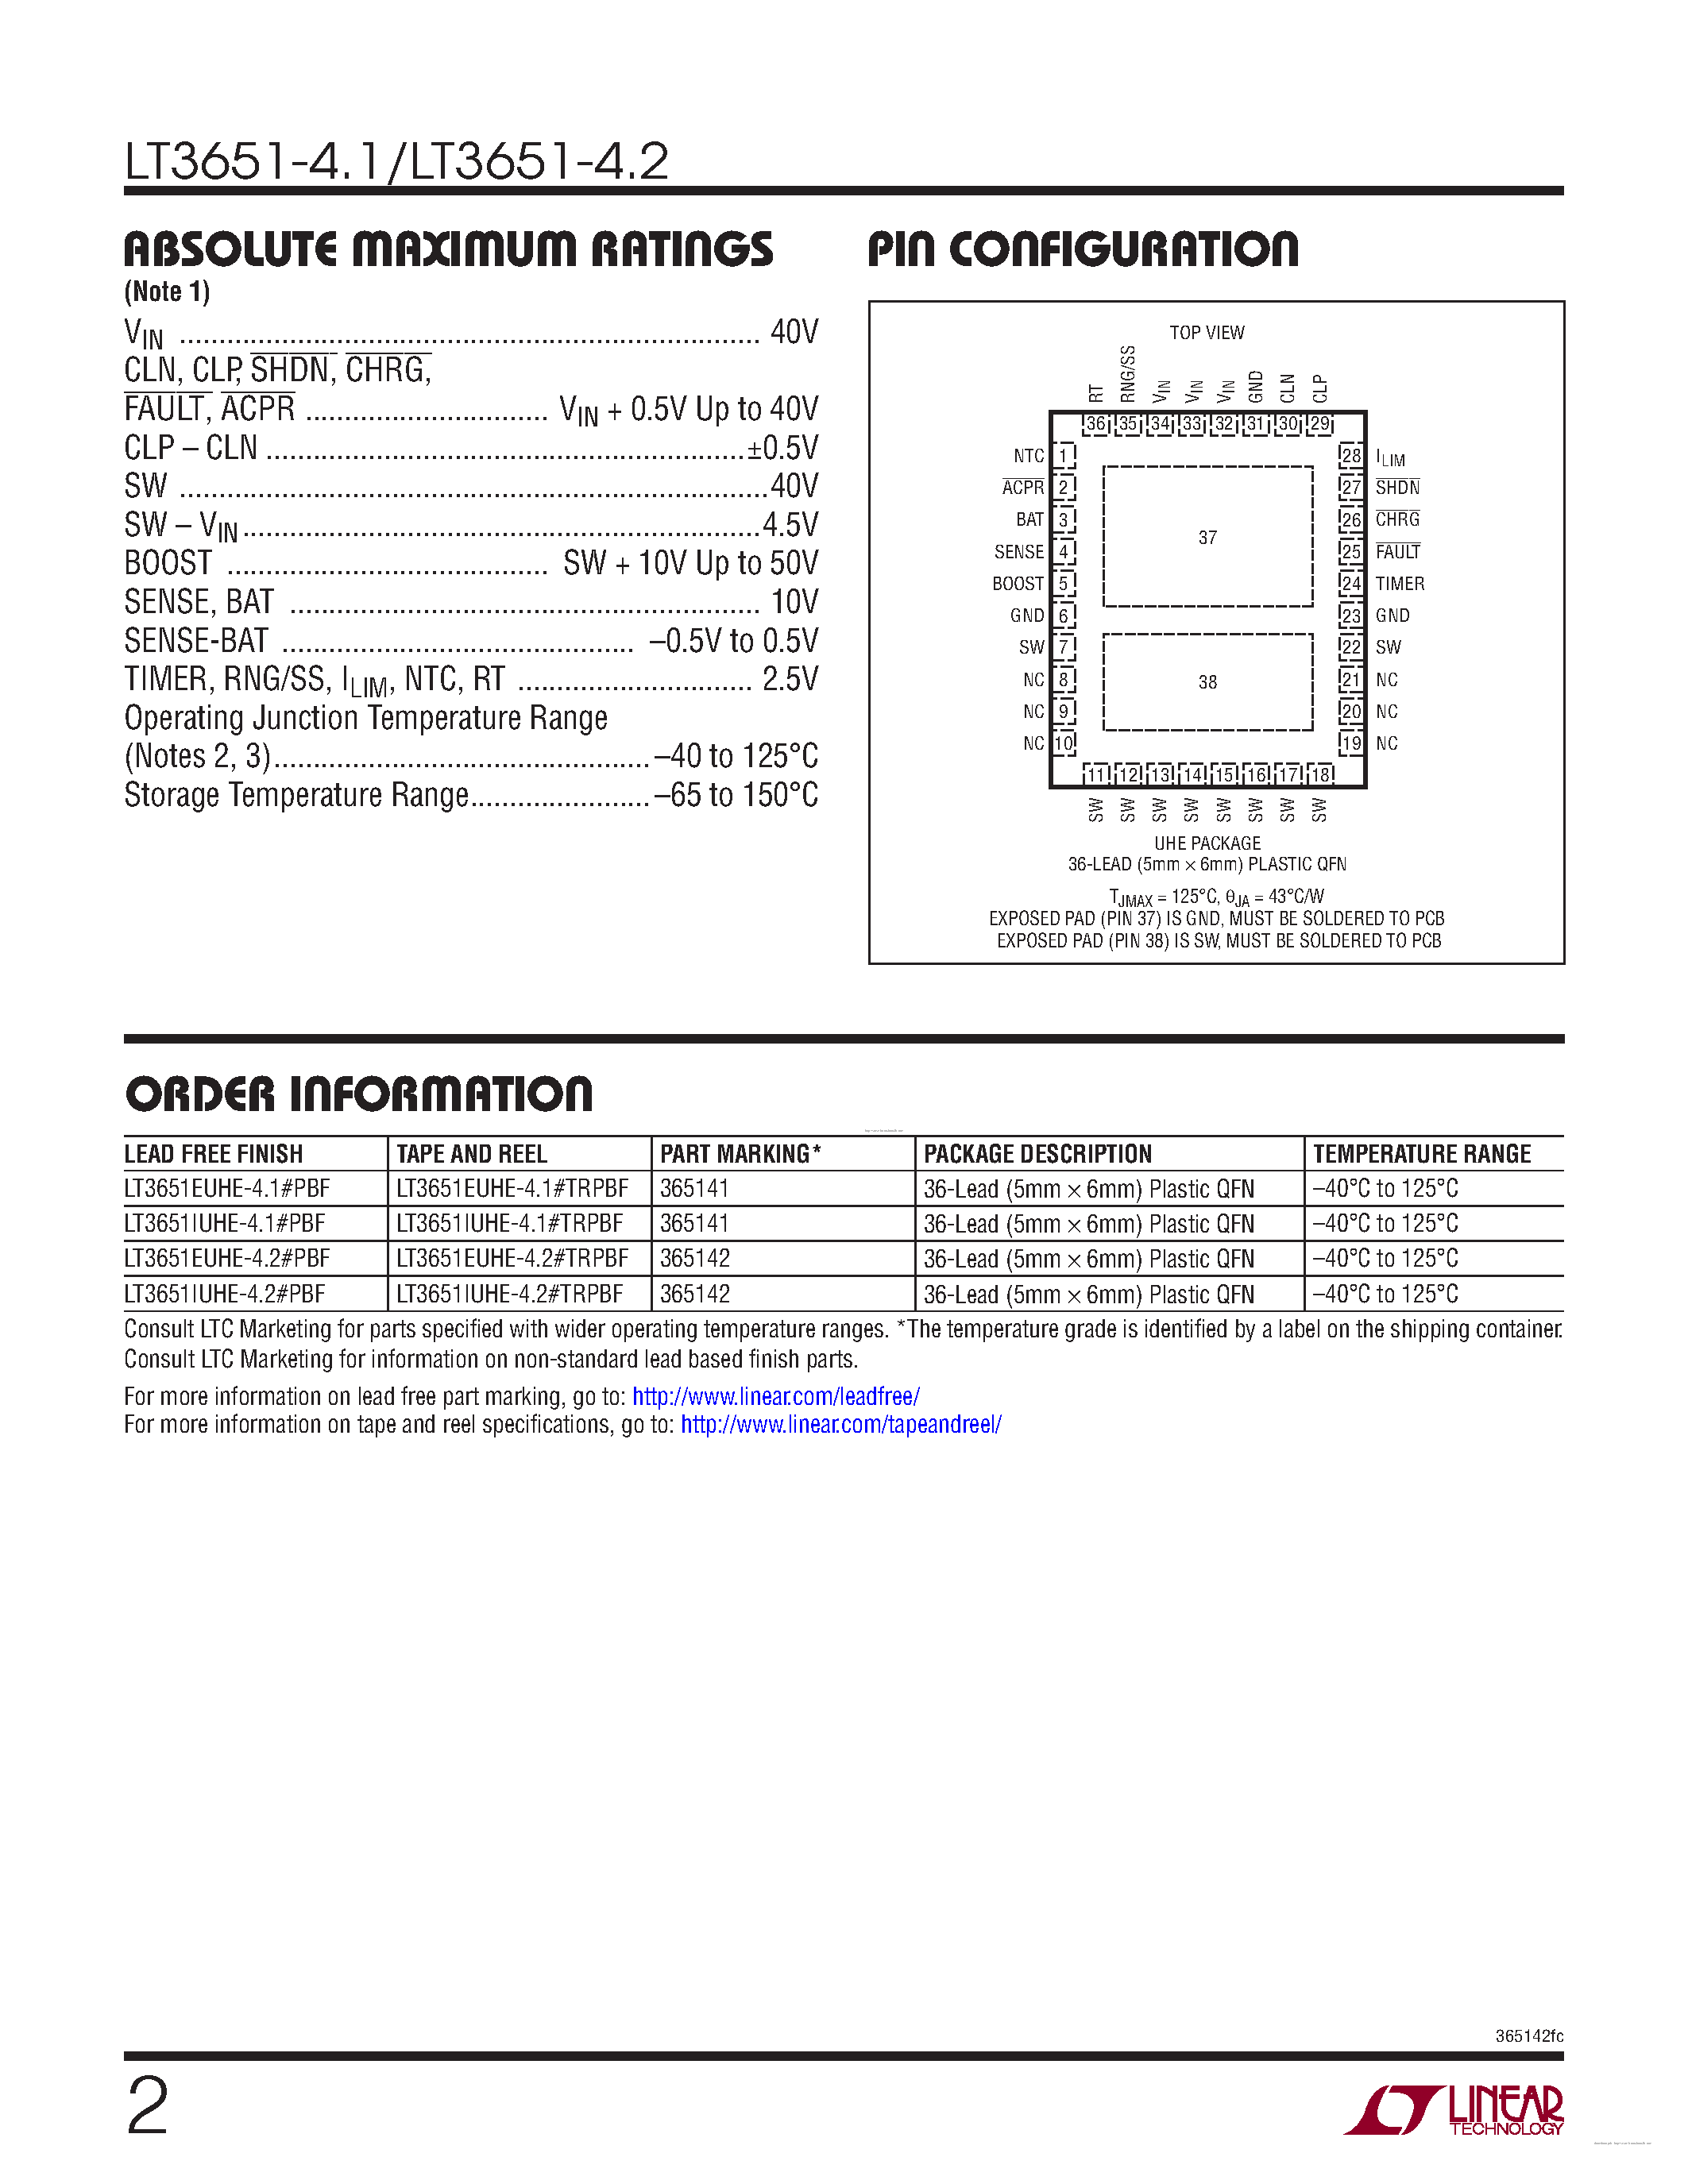 Datasheet LT3651-4.1 - (LT3651-4.1 / LT3651-4.2) Monolithic 4A High Voltage Li-Ion Battery Charger page 2